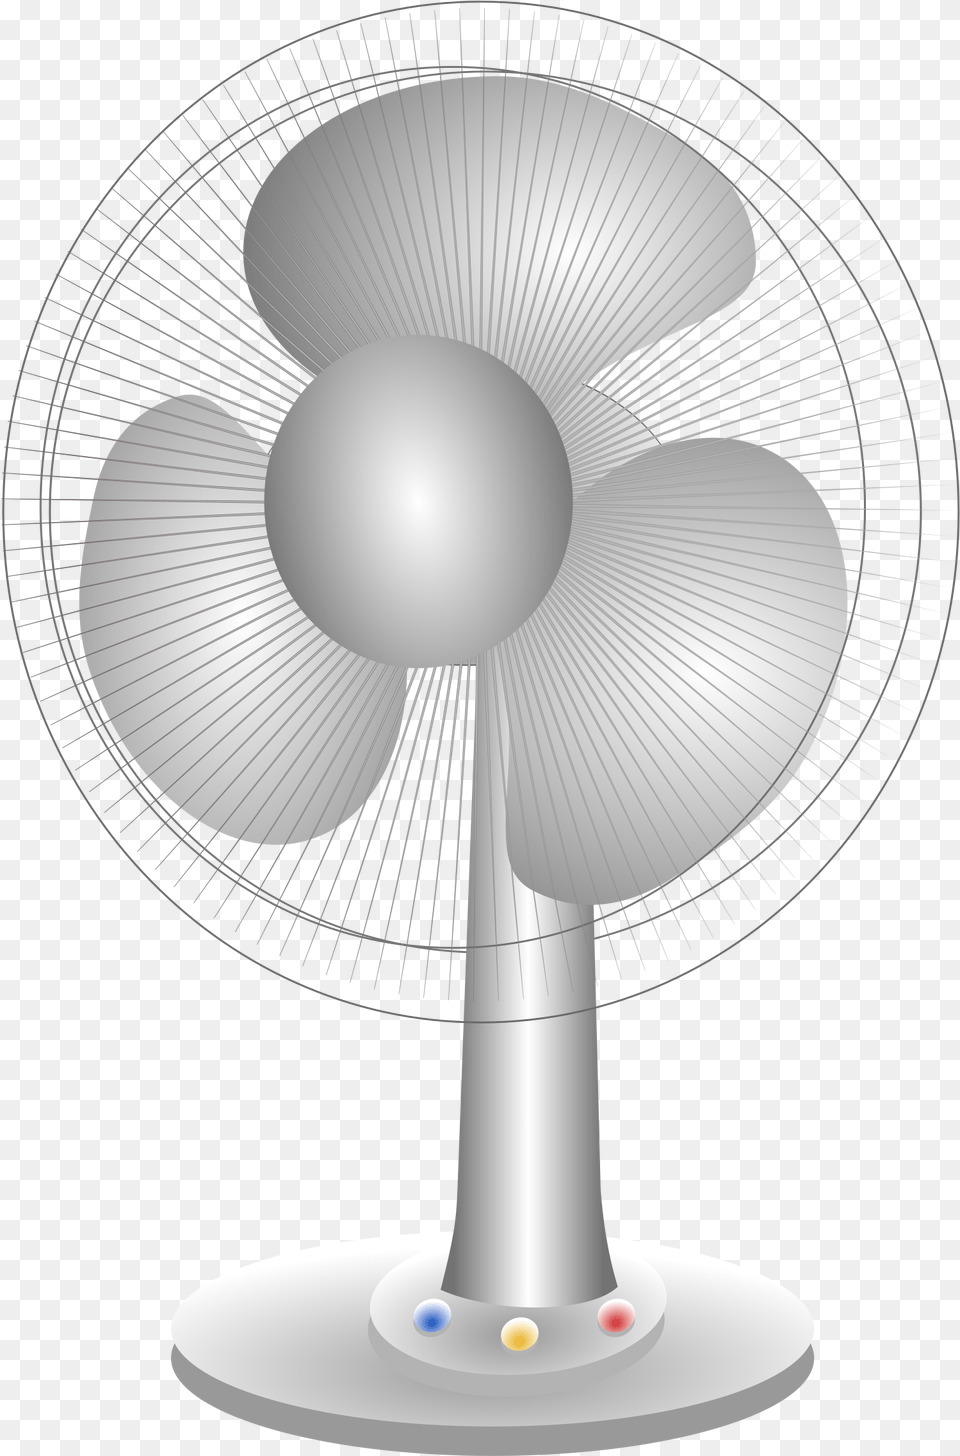 This Icons Design Of Electric Table Fan, Device, Appliance, Electrical Device, Electric Fan Free Transparent Png